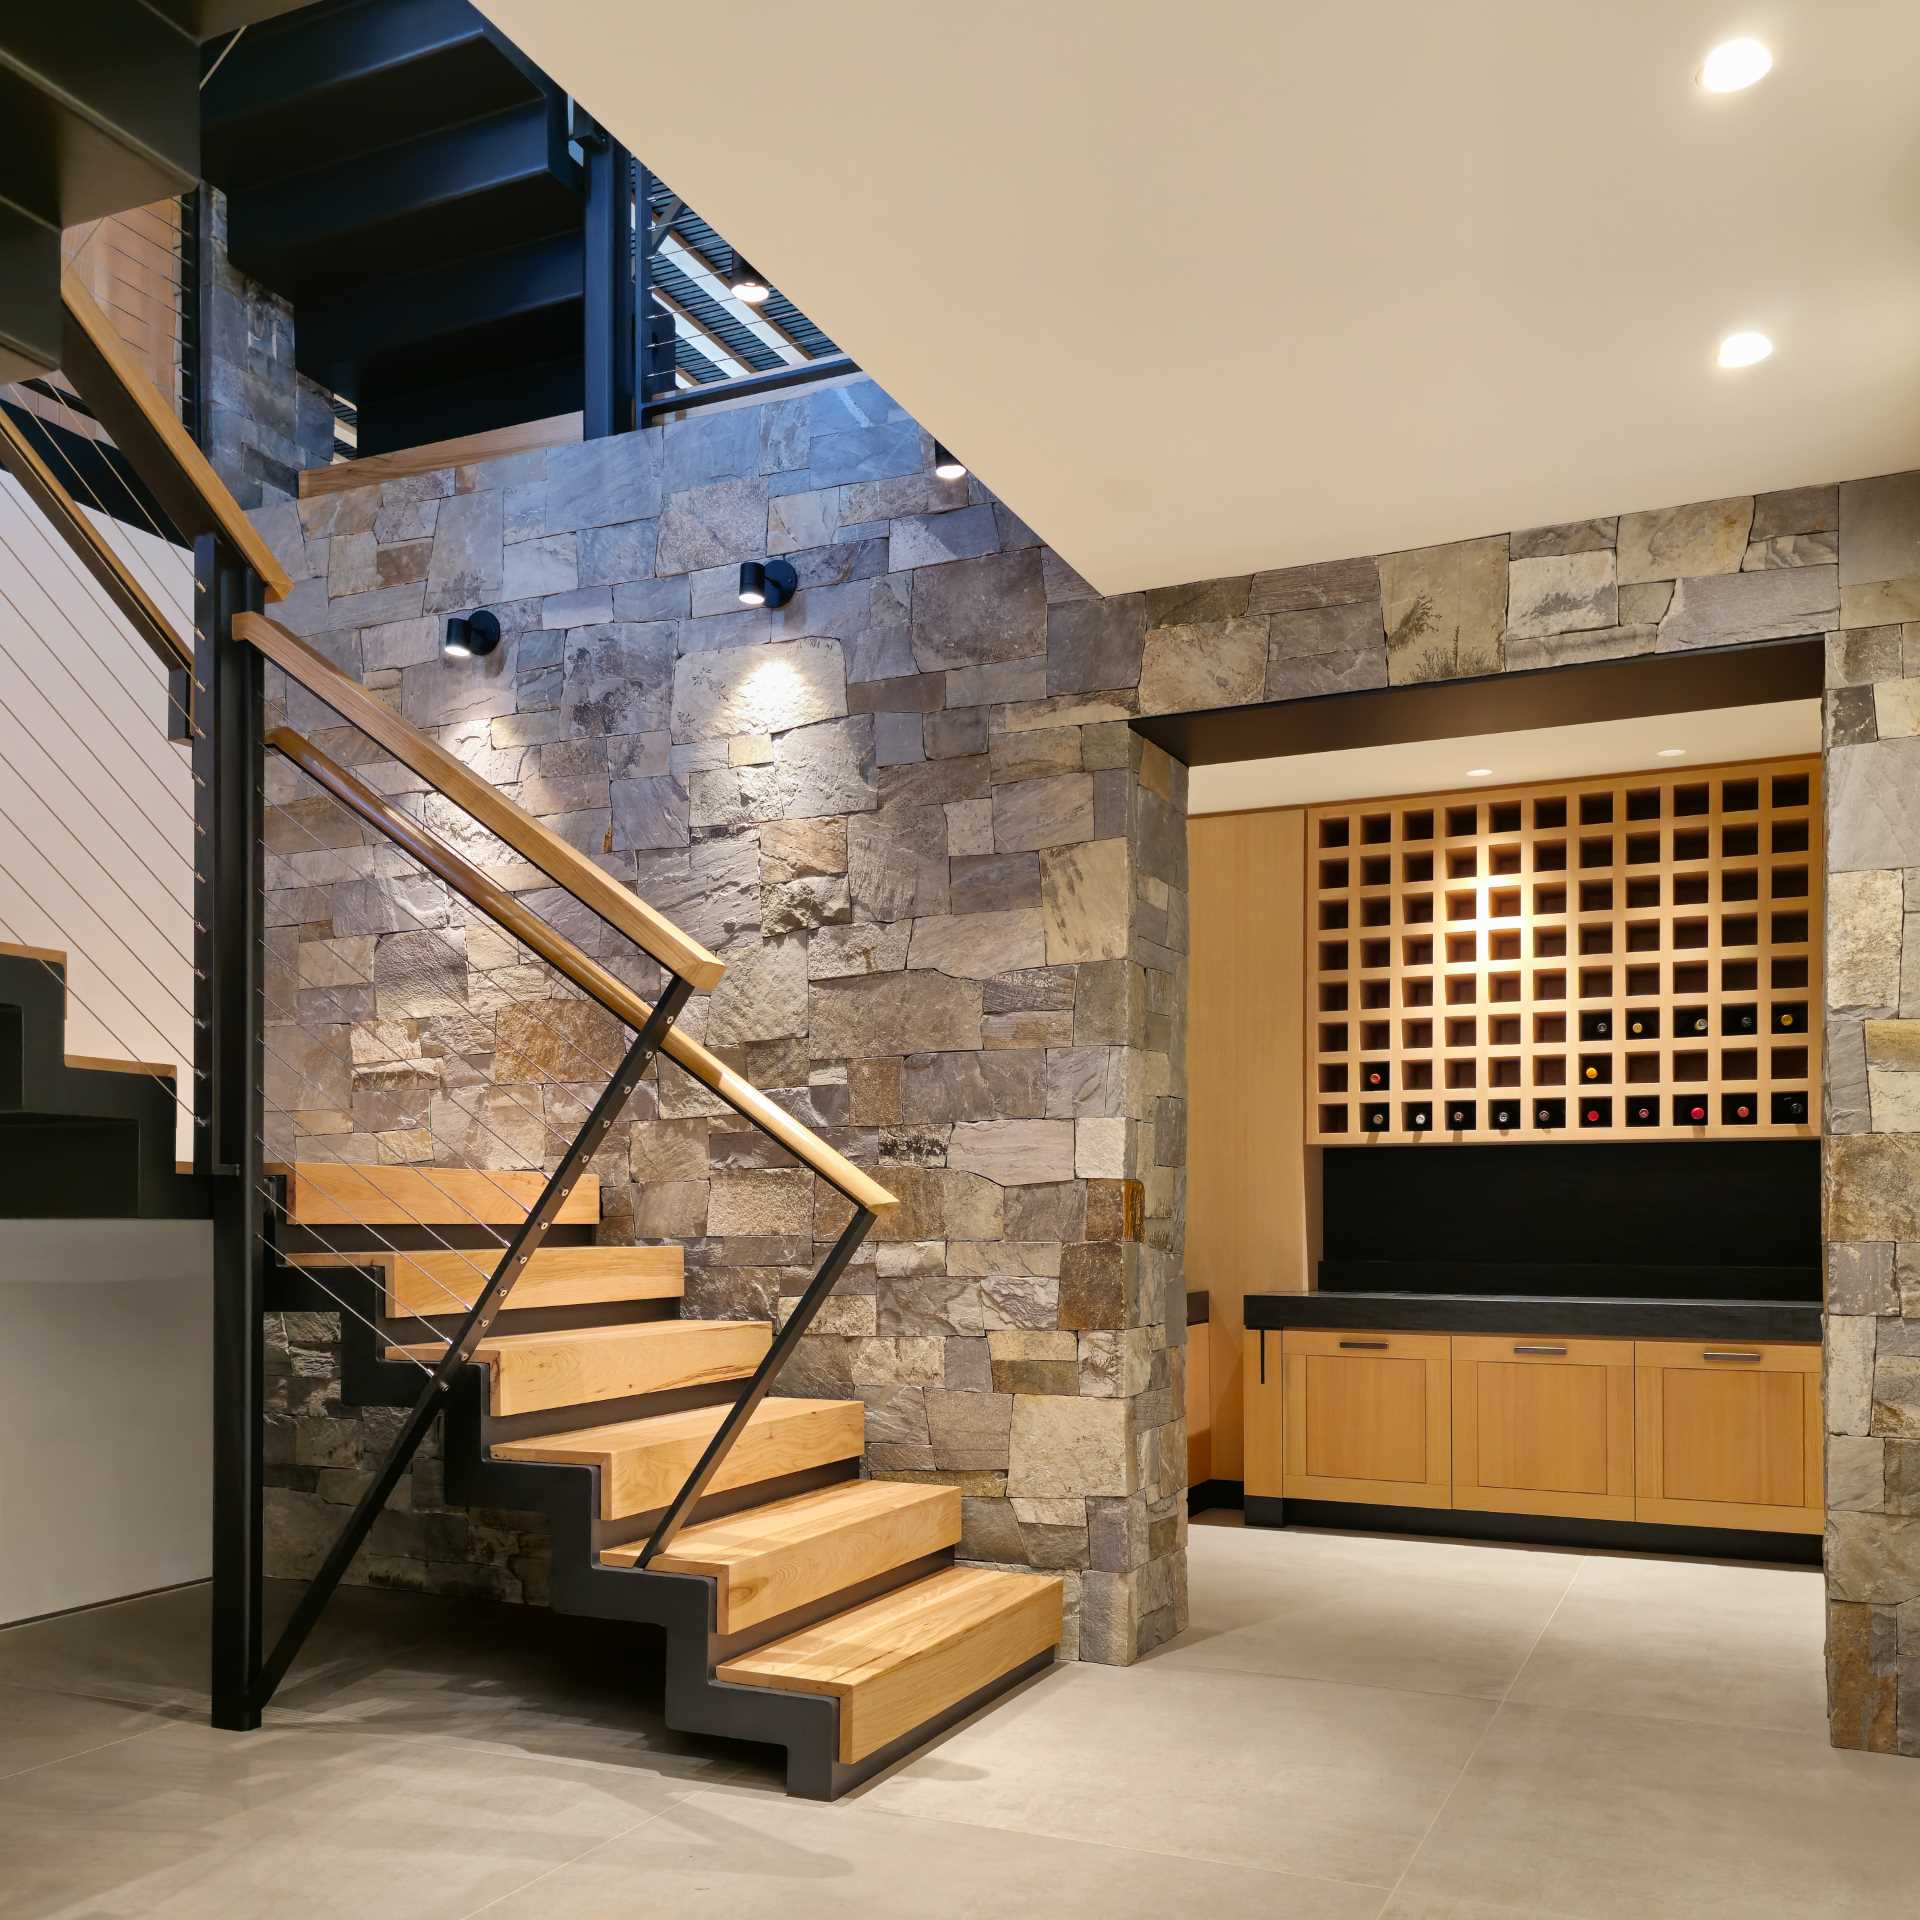 A modern home with steel and wood stairs, and a built-in wine rack.